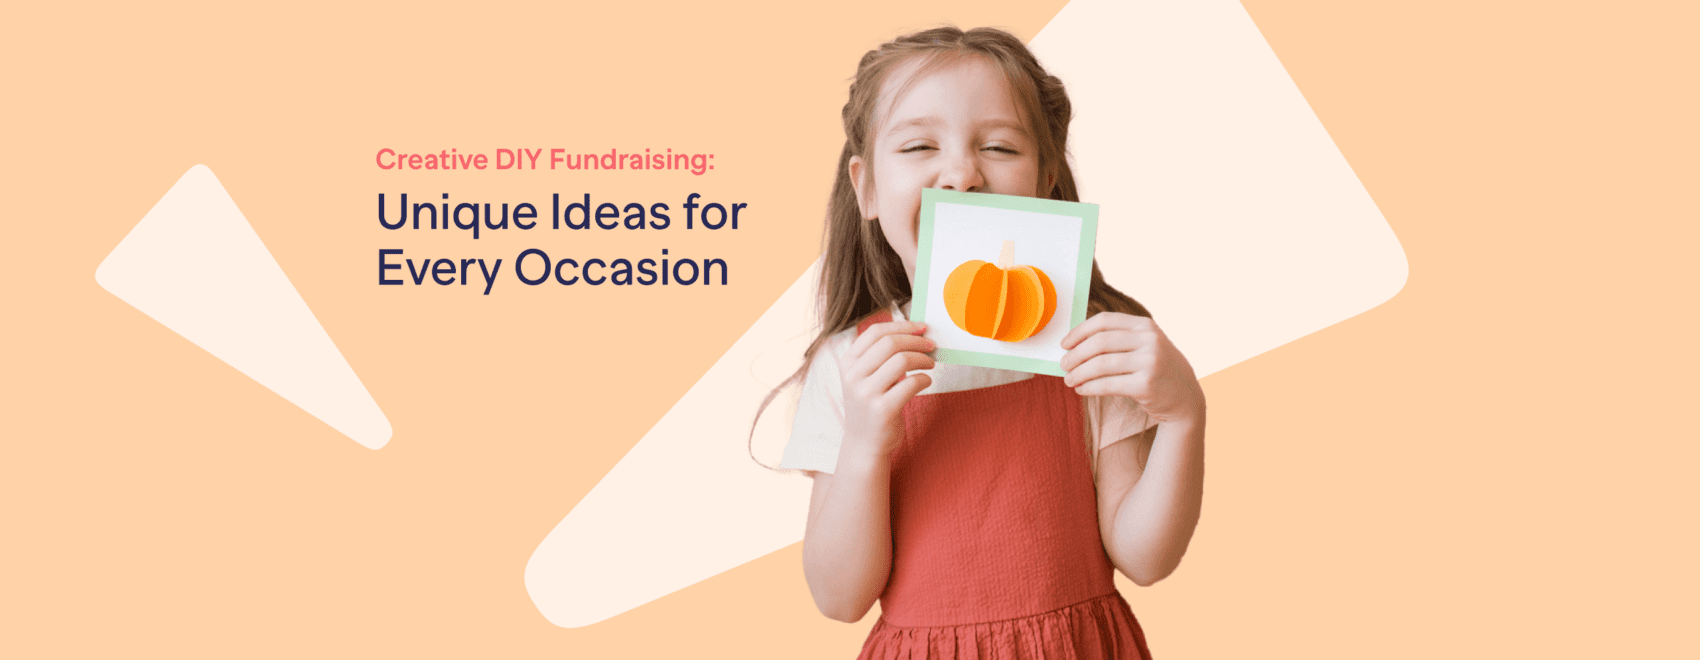 Creative DIY Fundraising Unique Ideas for Every Occasion